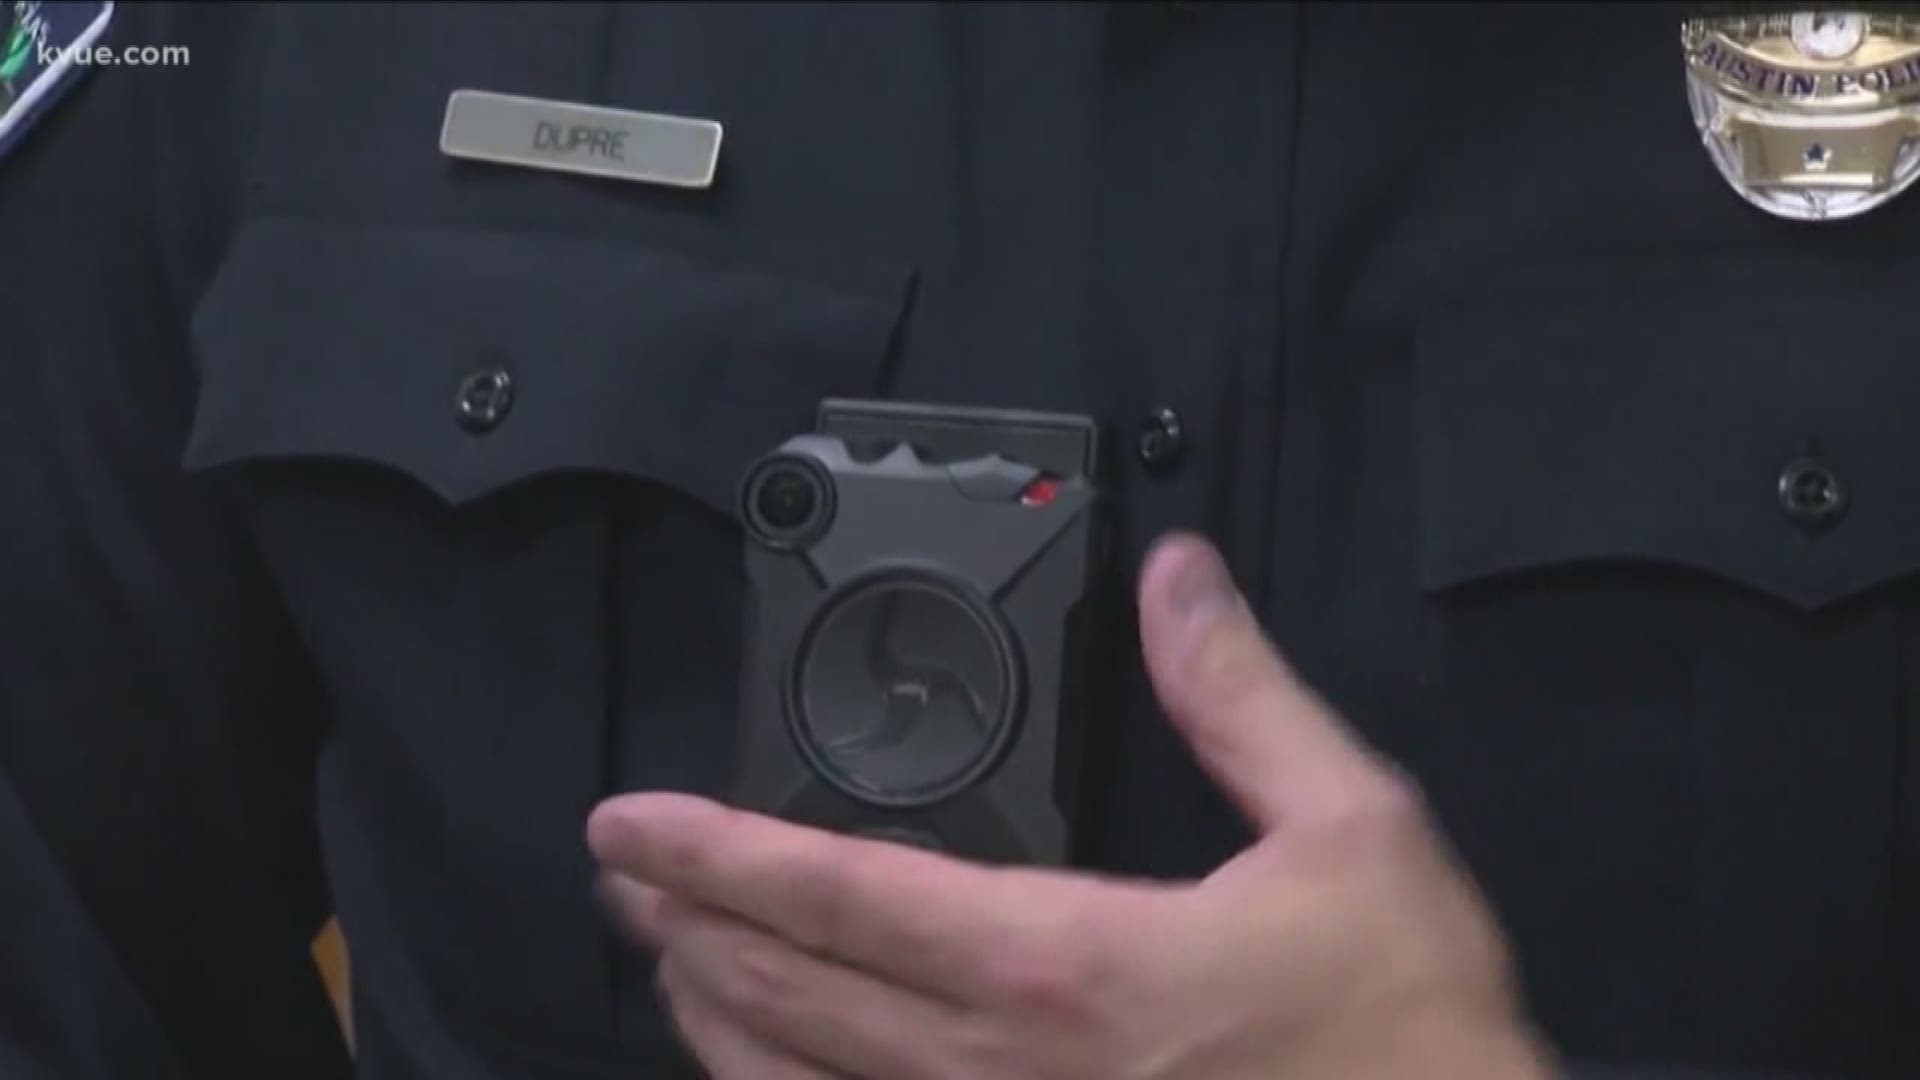 The city is working on a new policy to make Austin police share body cam video quicker. Advocates have been asking for a policy like this for years.